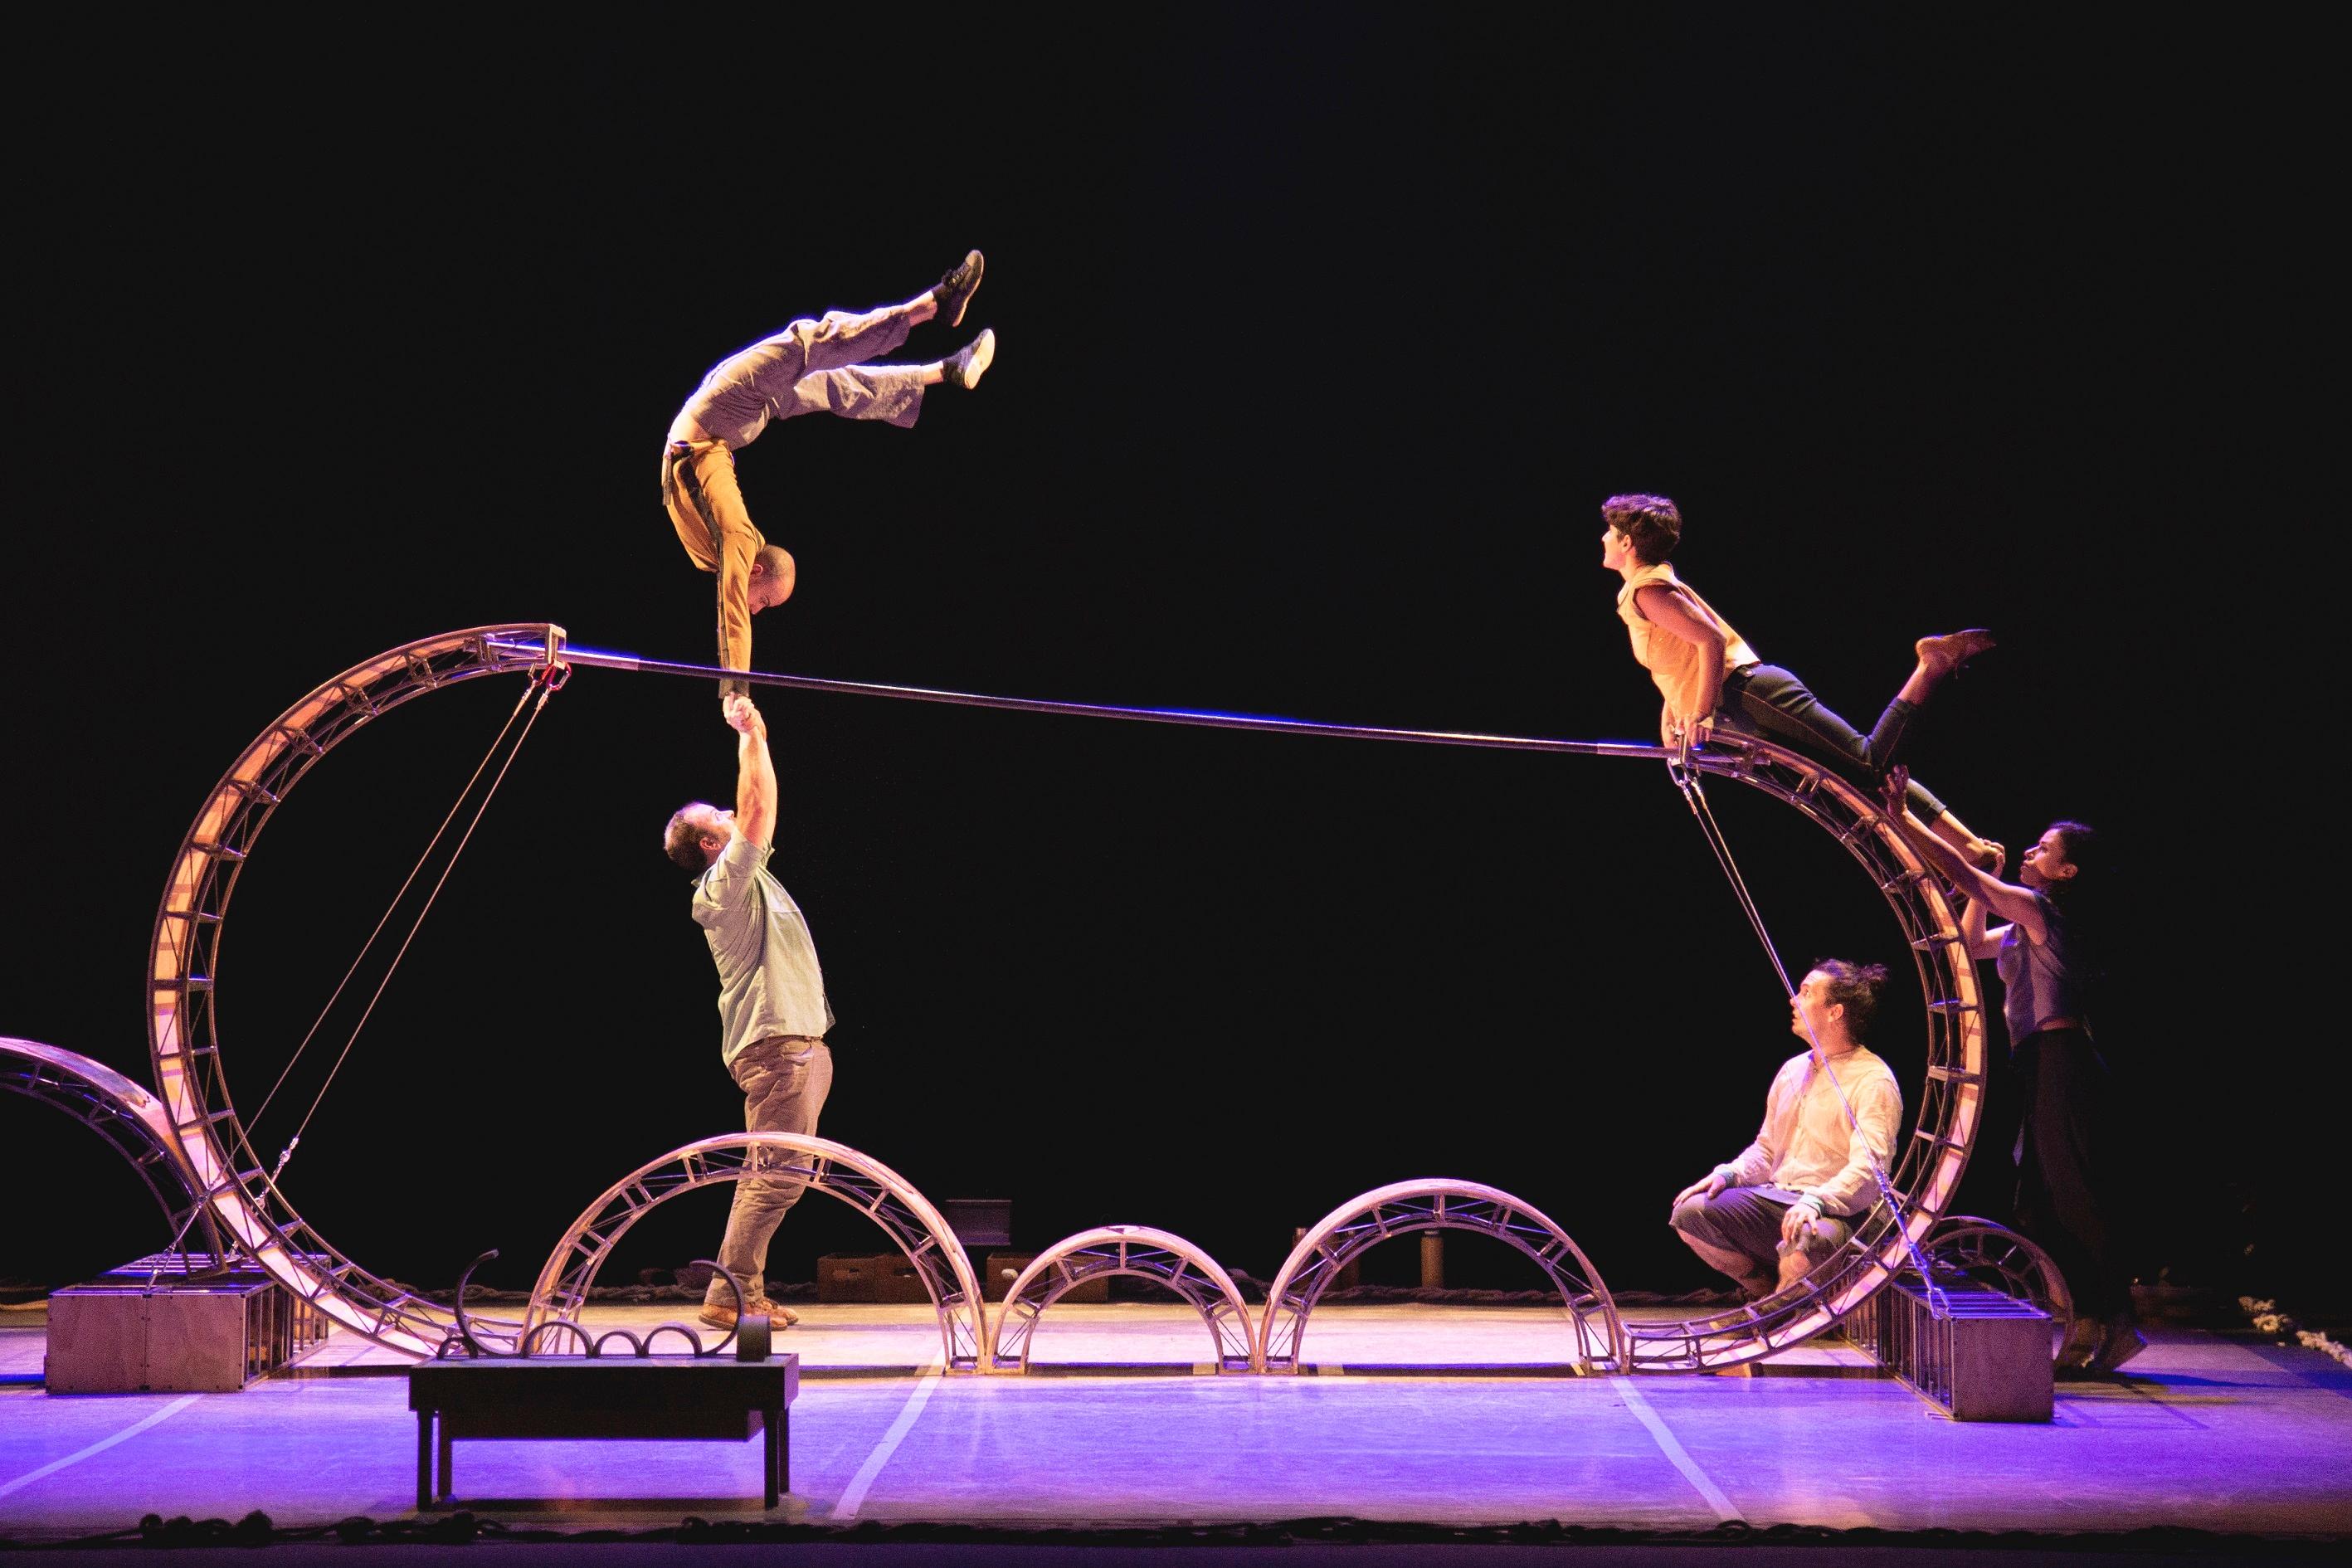 In view of the overwhelming response to the Spanish circus company Vaivén Circo's acrobatic show "Esencial", an additional performance will be held on July 30 at 7.30pm. Tickets for the show will be available at URBTIX from tomorrow (May 25).
